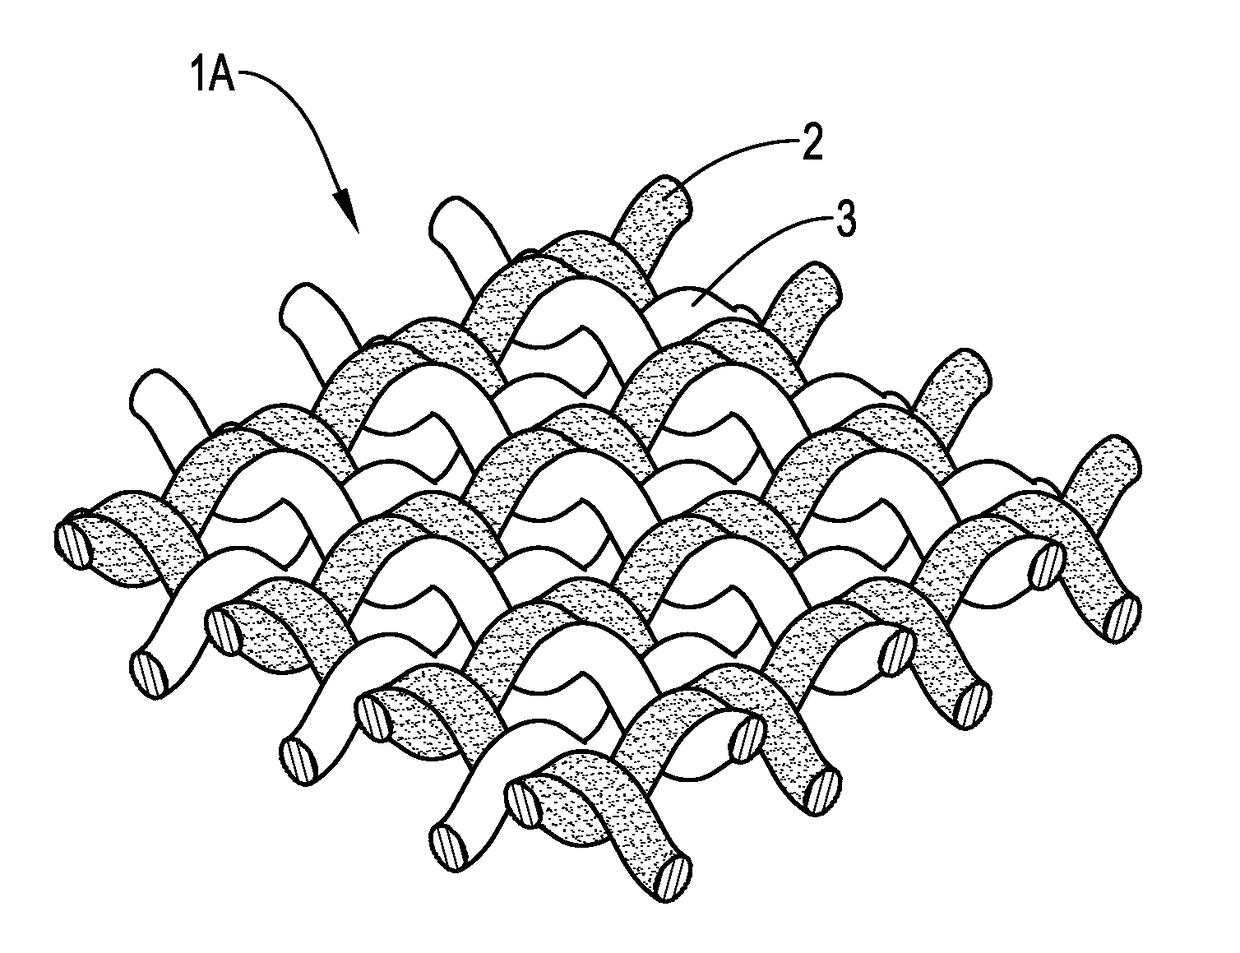 Reinforced composite fabric and method for preparing the same